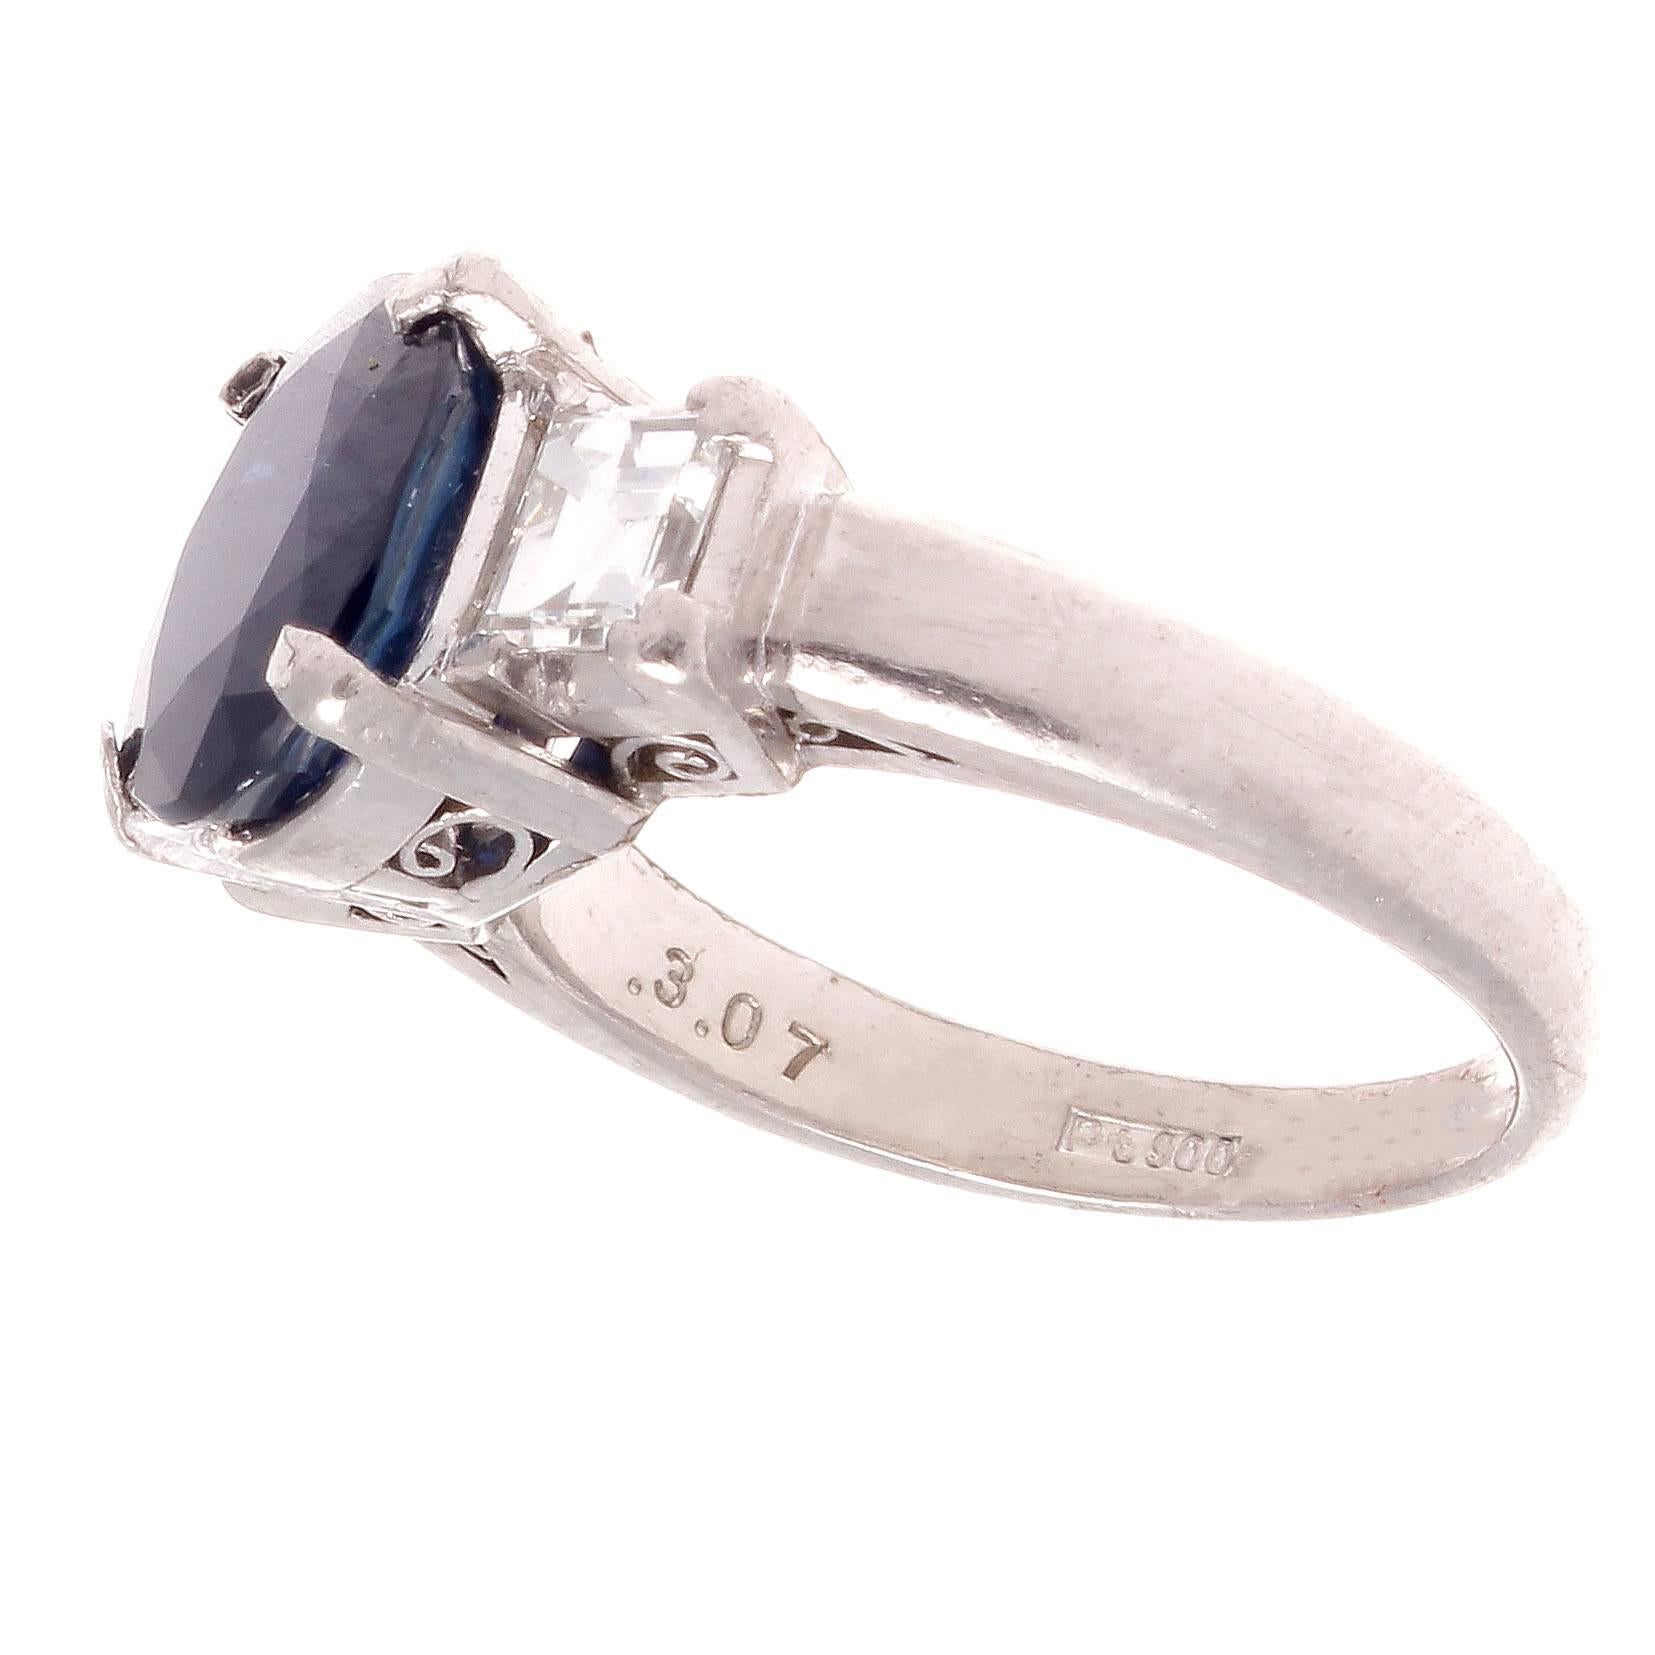 A new modern take on the classic engagement ring that is becoming ever popular in the new generation. Featuring a 3.07 carat vivid navy blue sapphire accented on either side by two near colorless emerald cut diamonds. Crafted in platinum.

Ring size